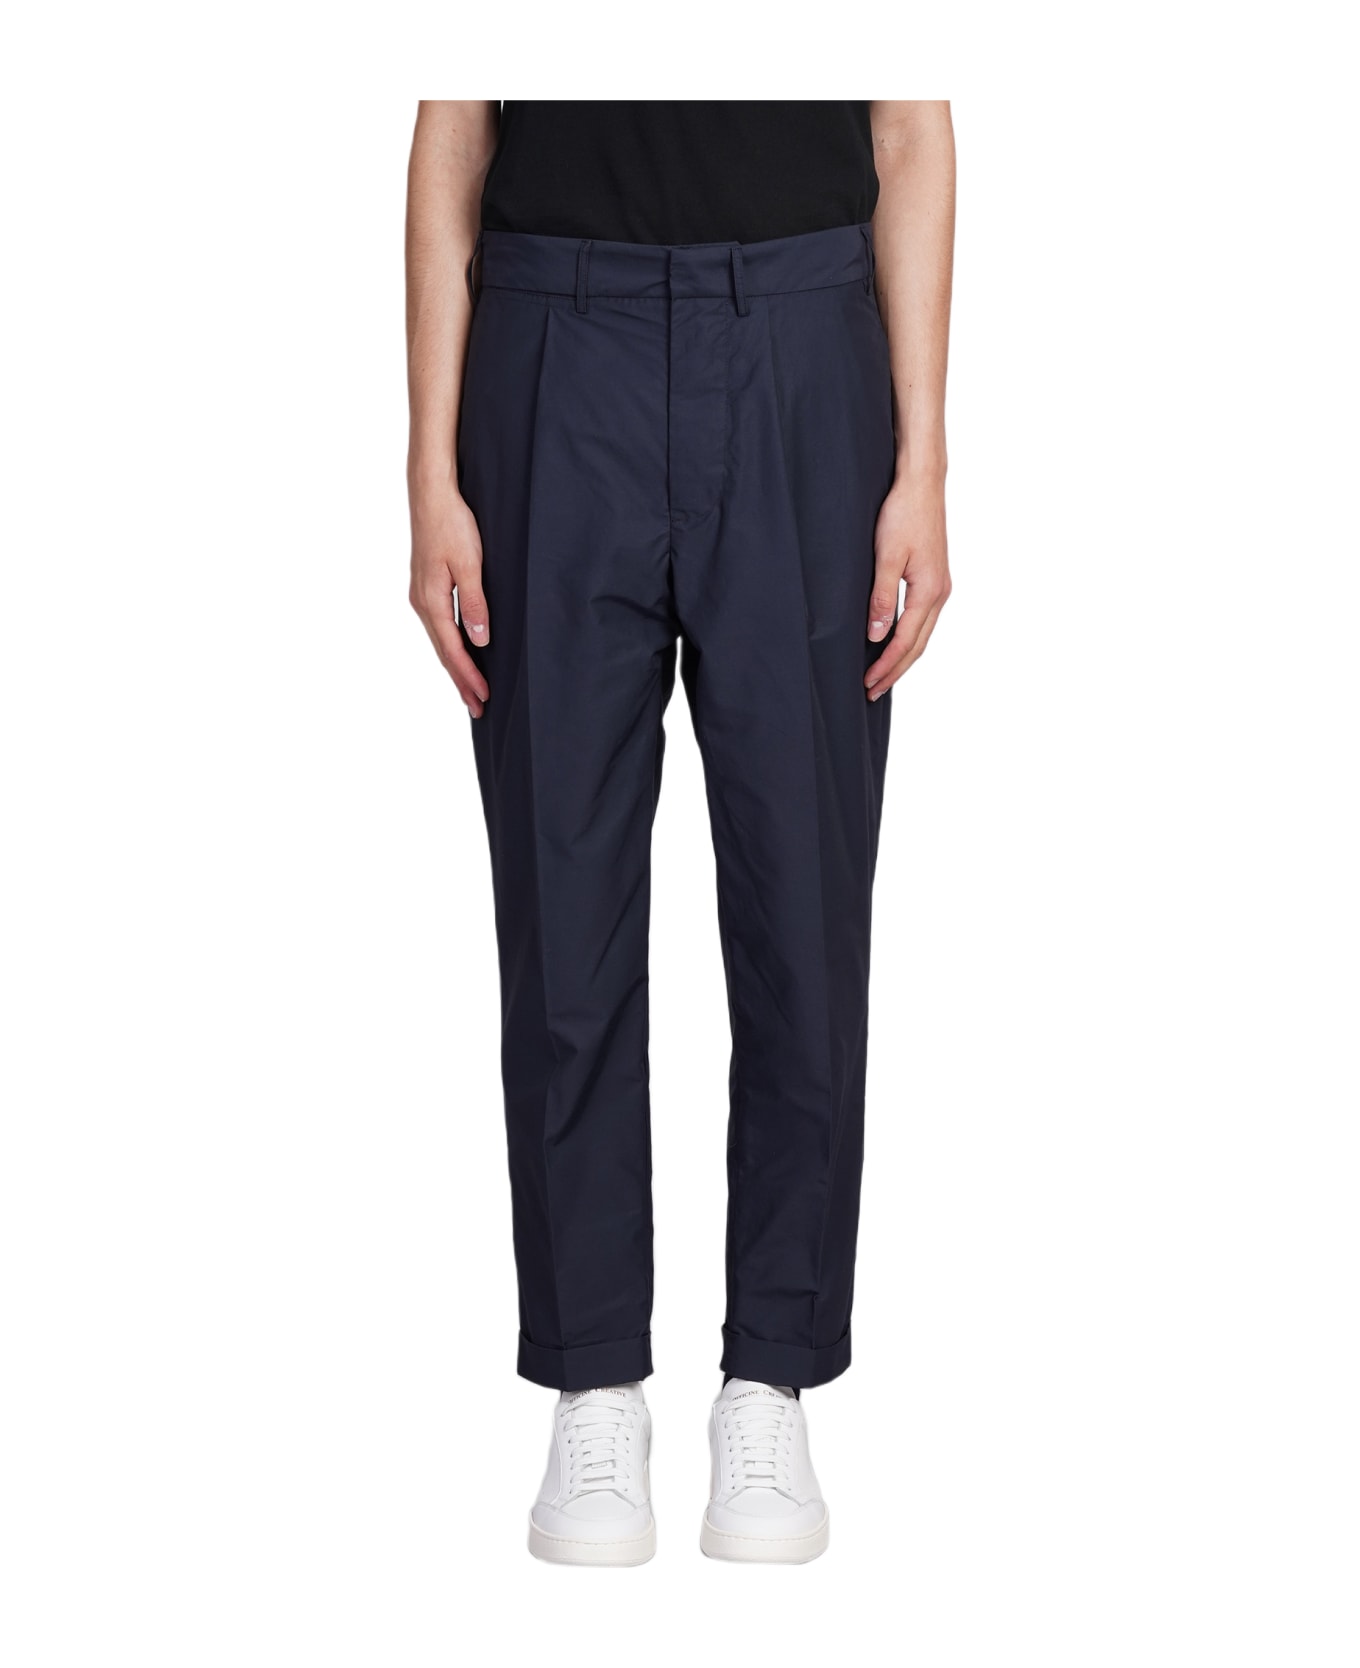 Mauro Grifoni Pants In Blue Cotton - blue ボトムス